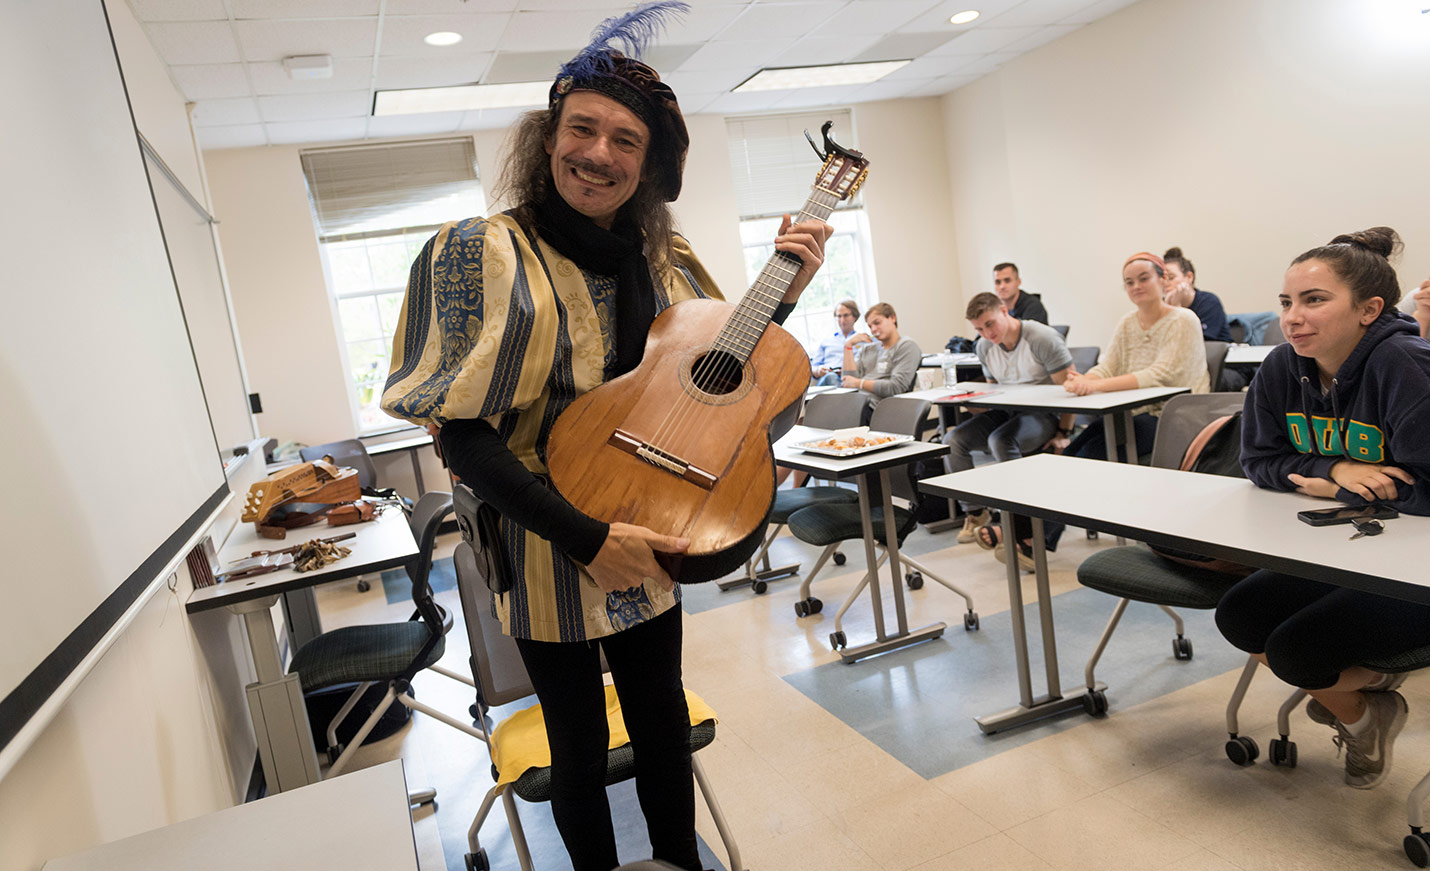 A man dressed as Don Quixote holds a guitar at the front of a classroom full of students